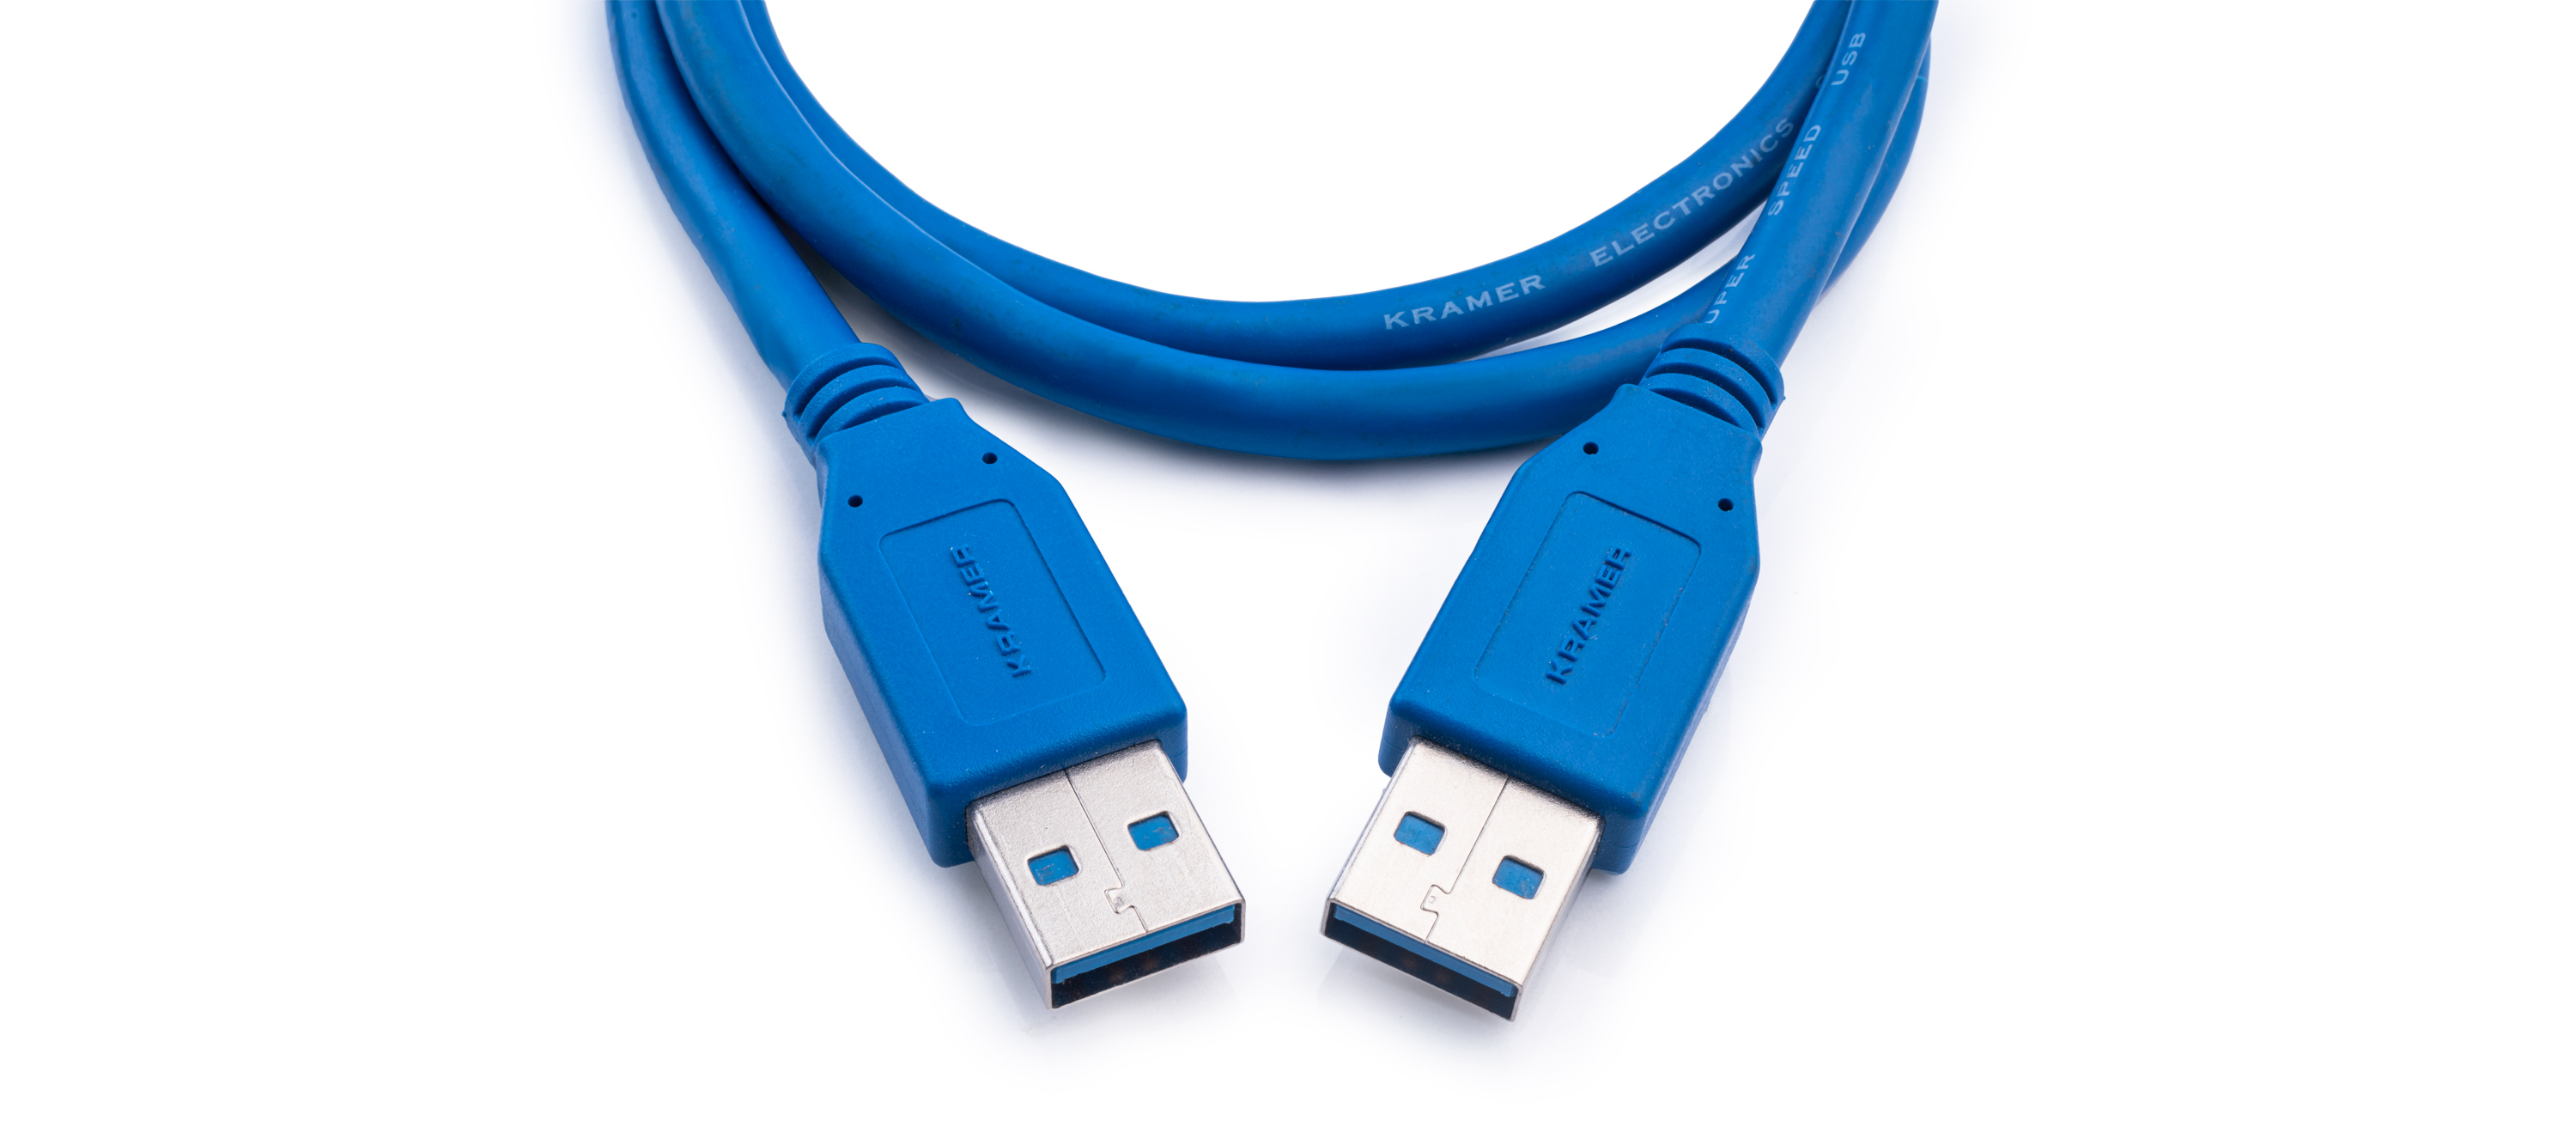 C-USB3/AA-6 USB 3.0 A (M) to A (M) Cable 6'